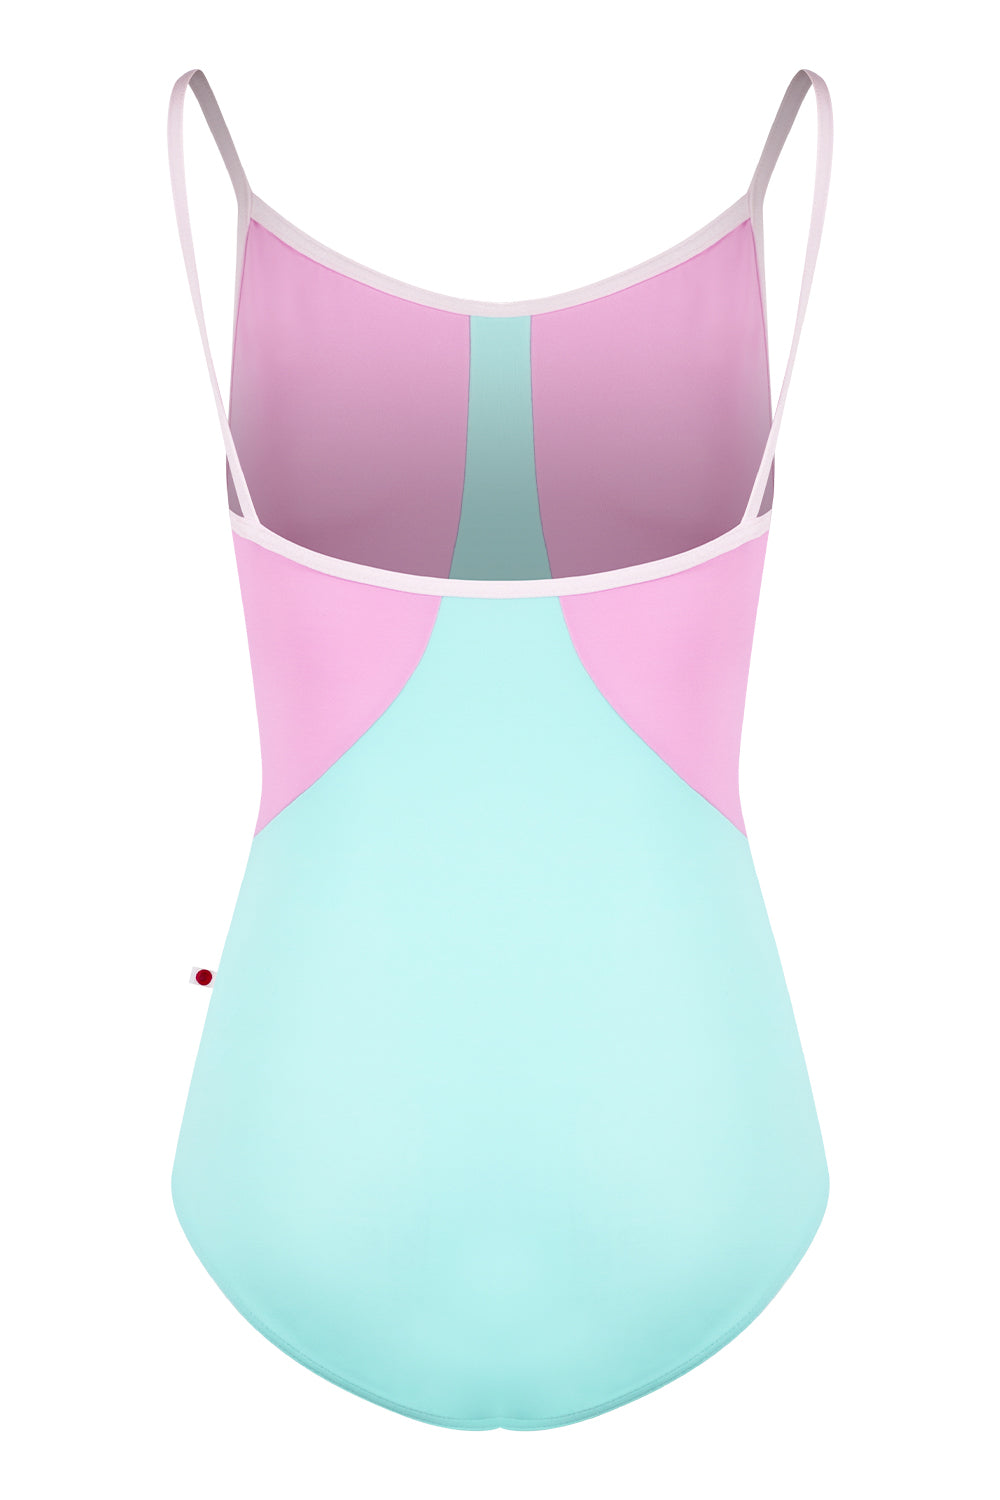 Amanda leotard in T-Frozen body color with T-Macaron top color and T-Rose trim color